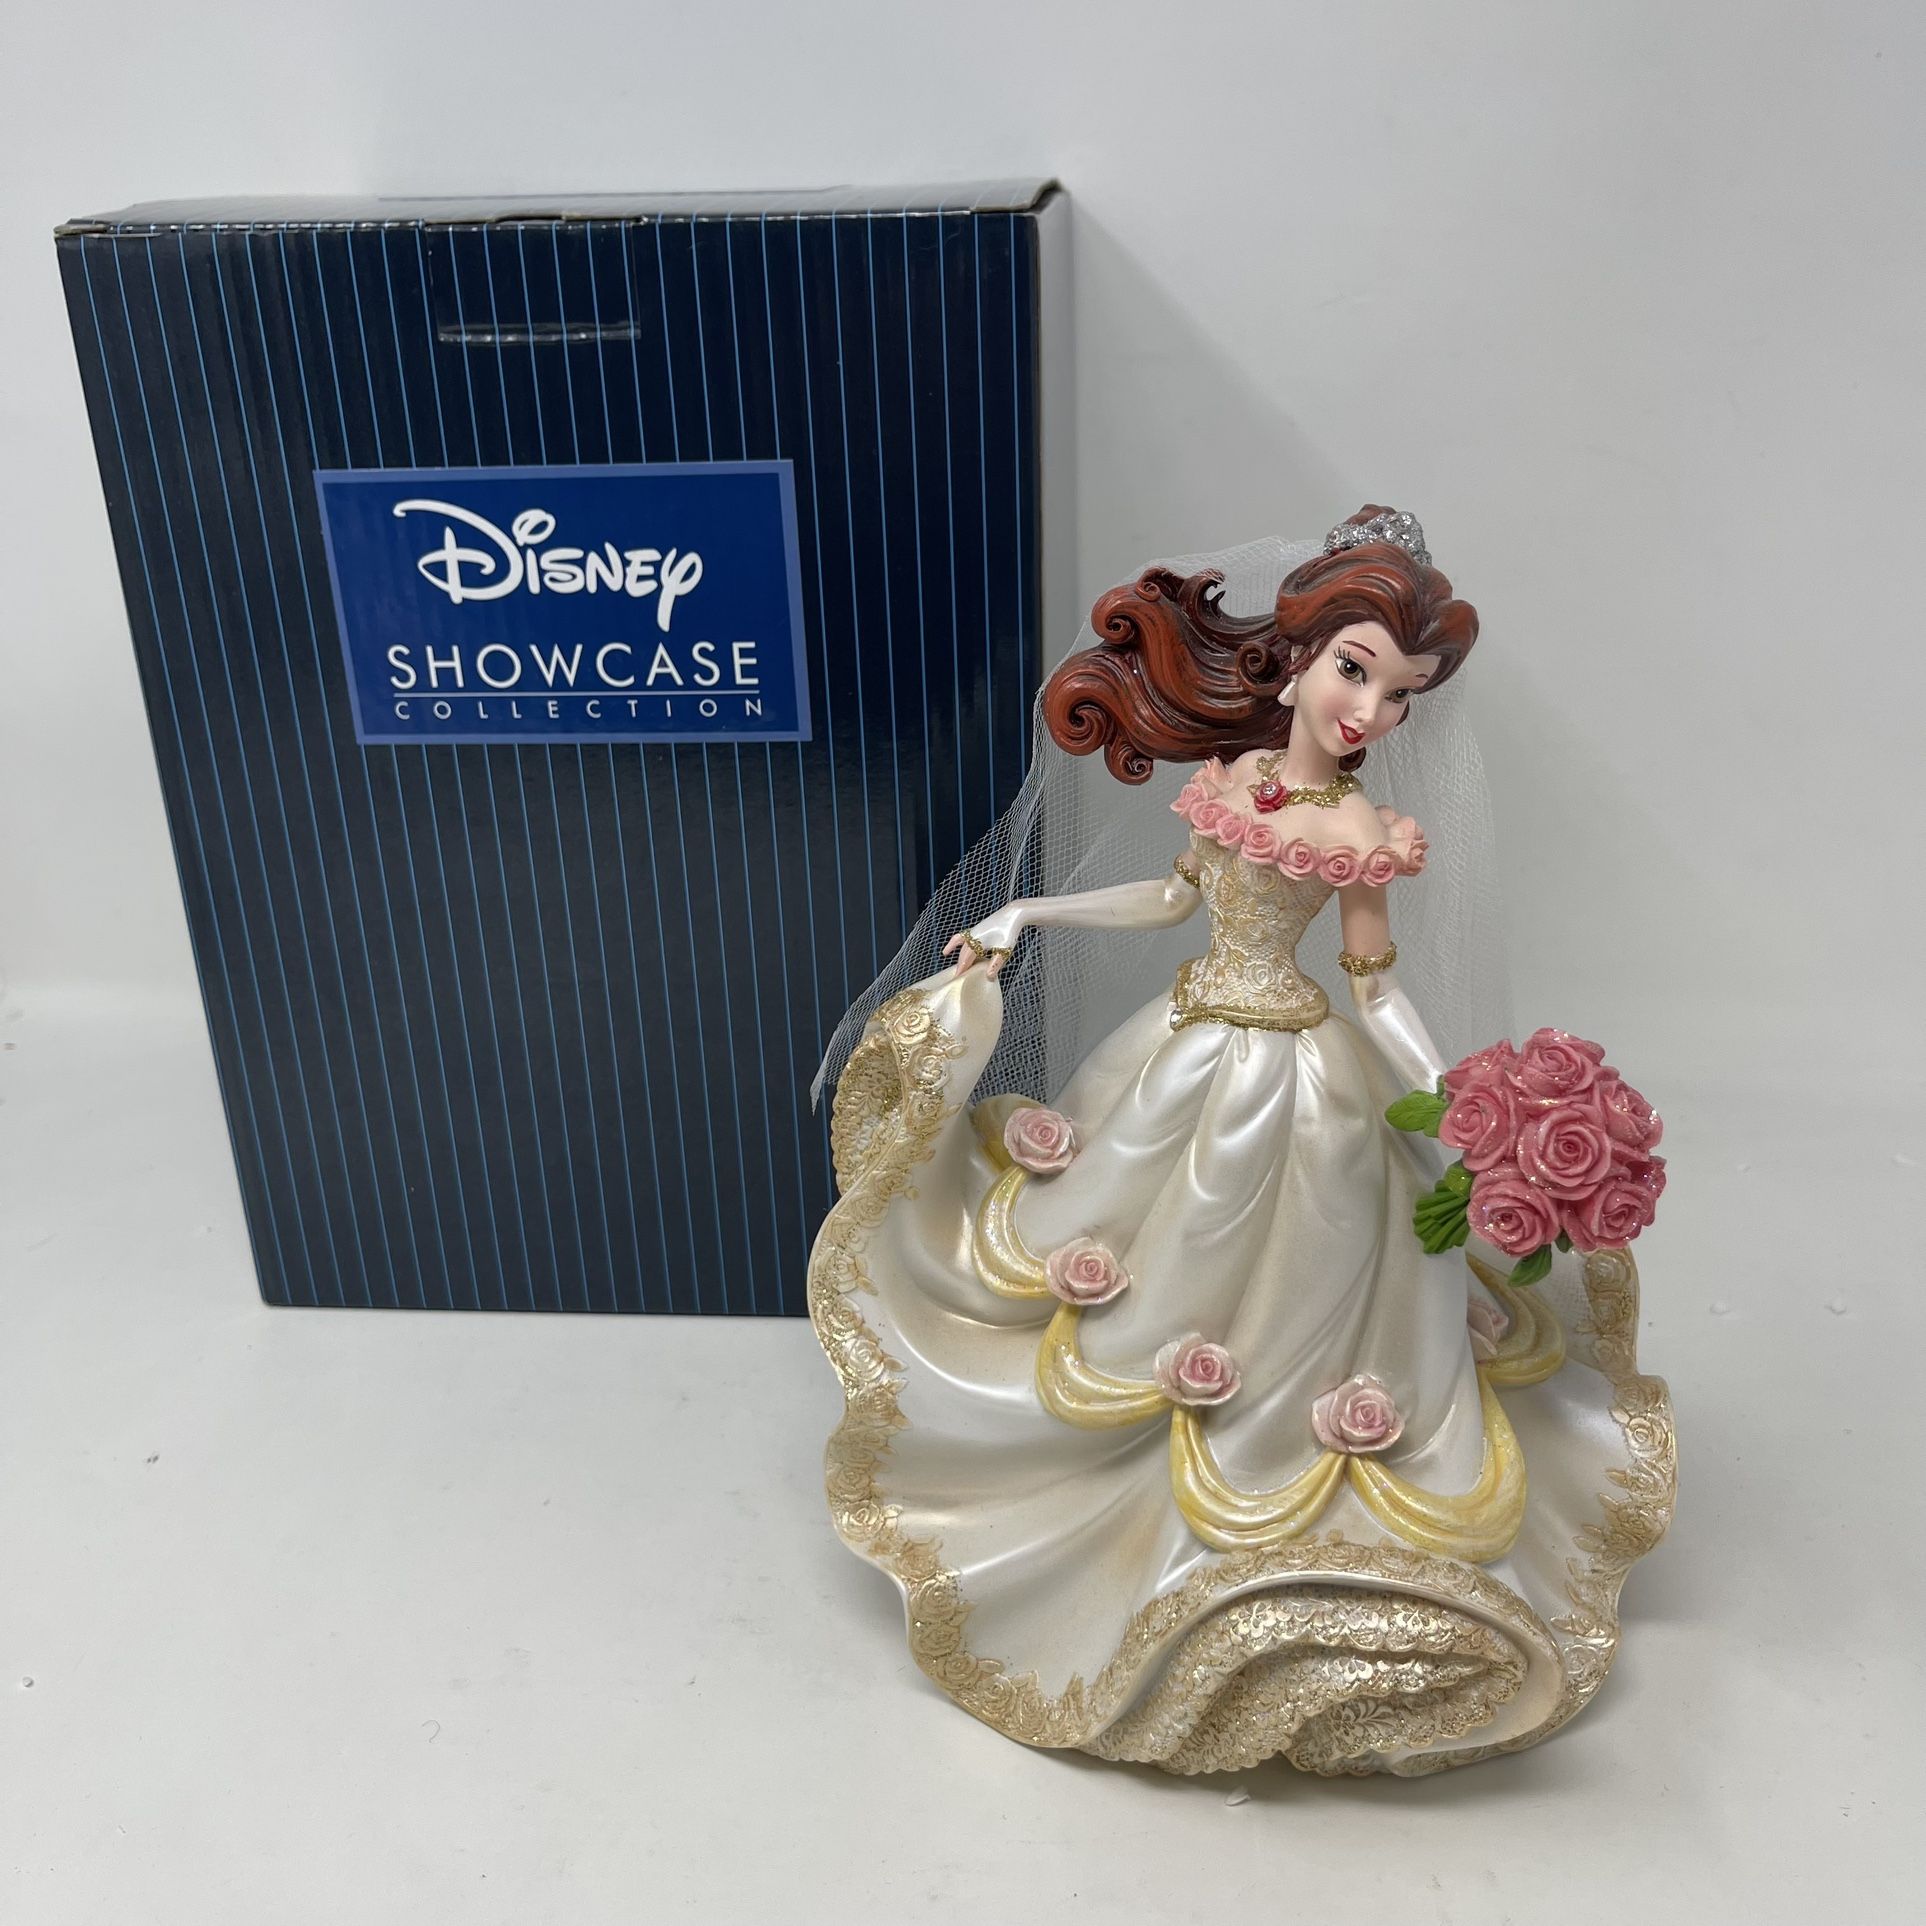 Belle Wedding Figurine Beauty & The Beast Disney Showcase Collection (contact info removed)